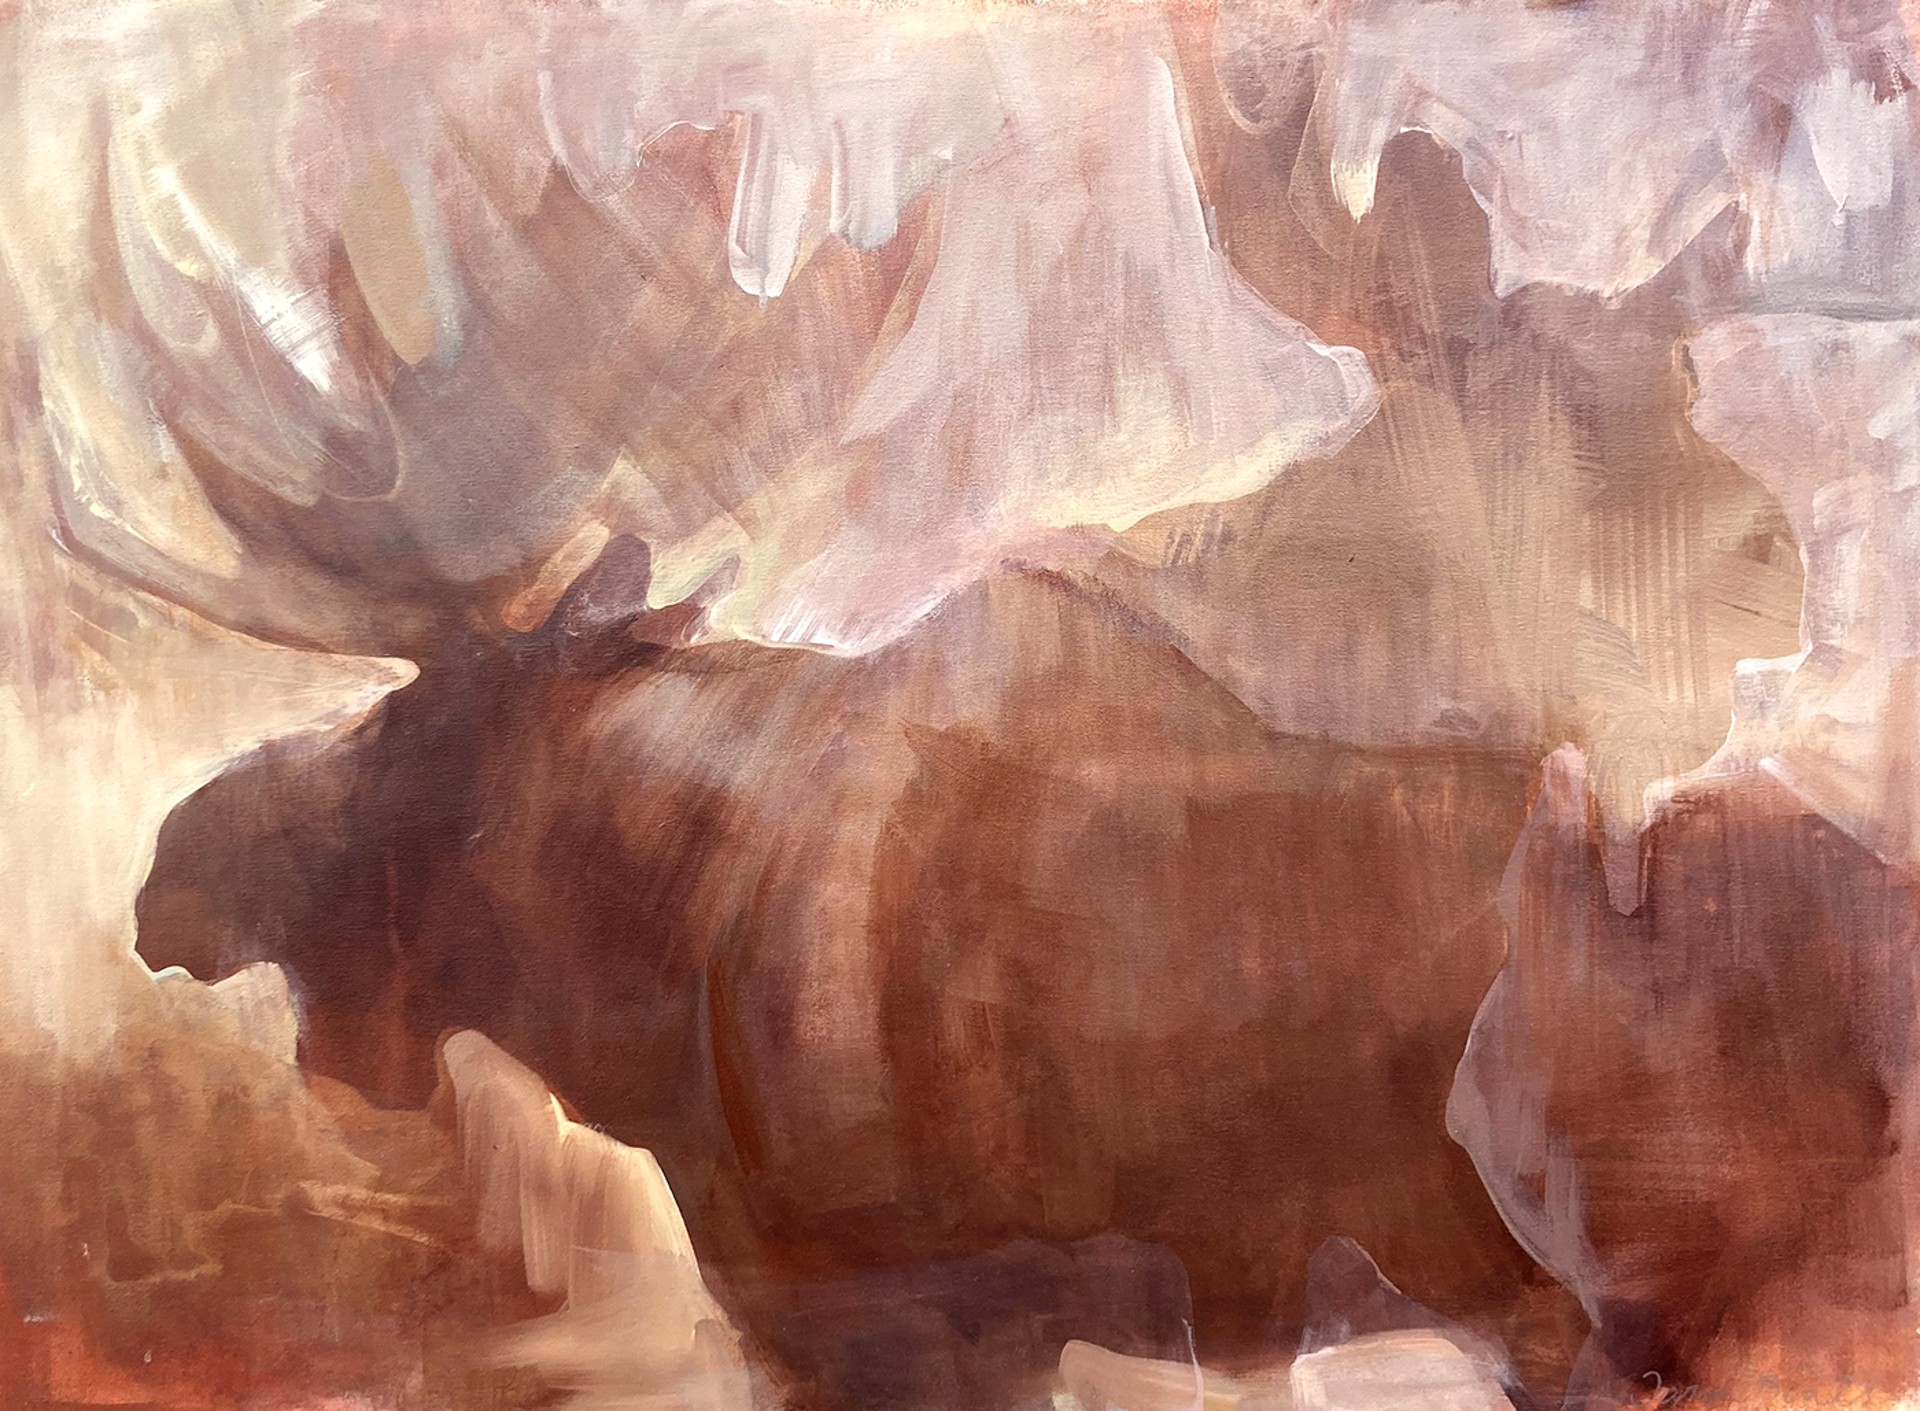 Original Acrylic Painting By Taryn Boals Featuring Two Bull Moose In Warm Tones